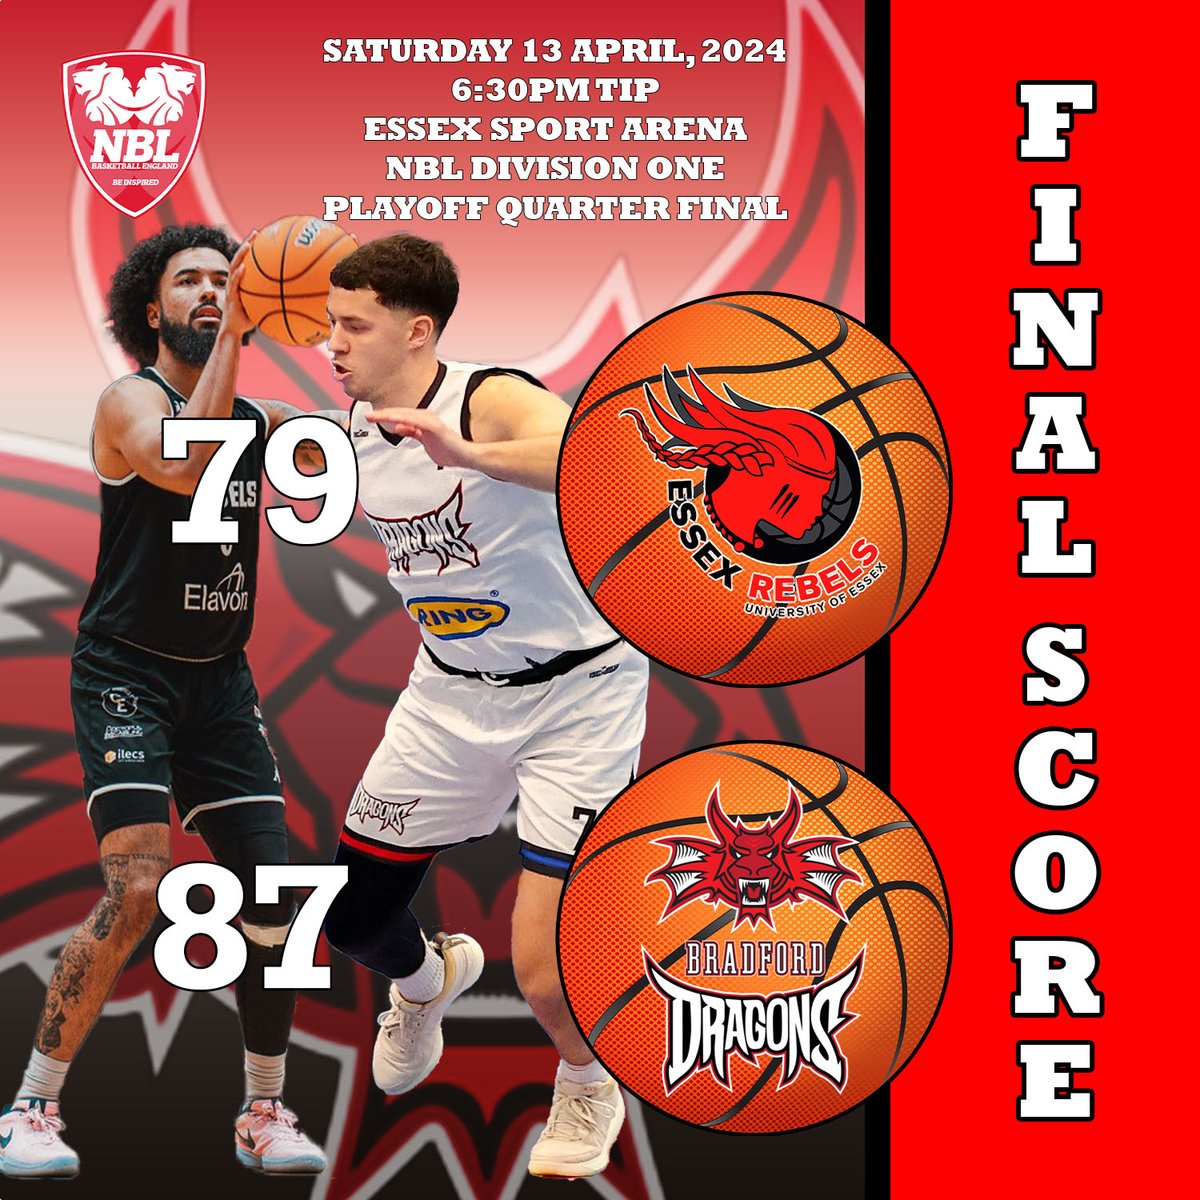 Game over in the Essex Sports Arena and we’ll see you next week in the Dragons’ Den for the semi final.

#BradfordDragons #Basketball #OneClubOneFamily #nbl2324